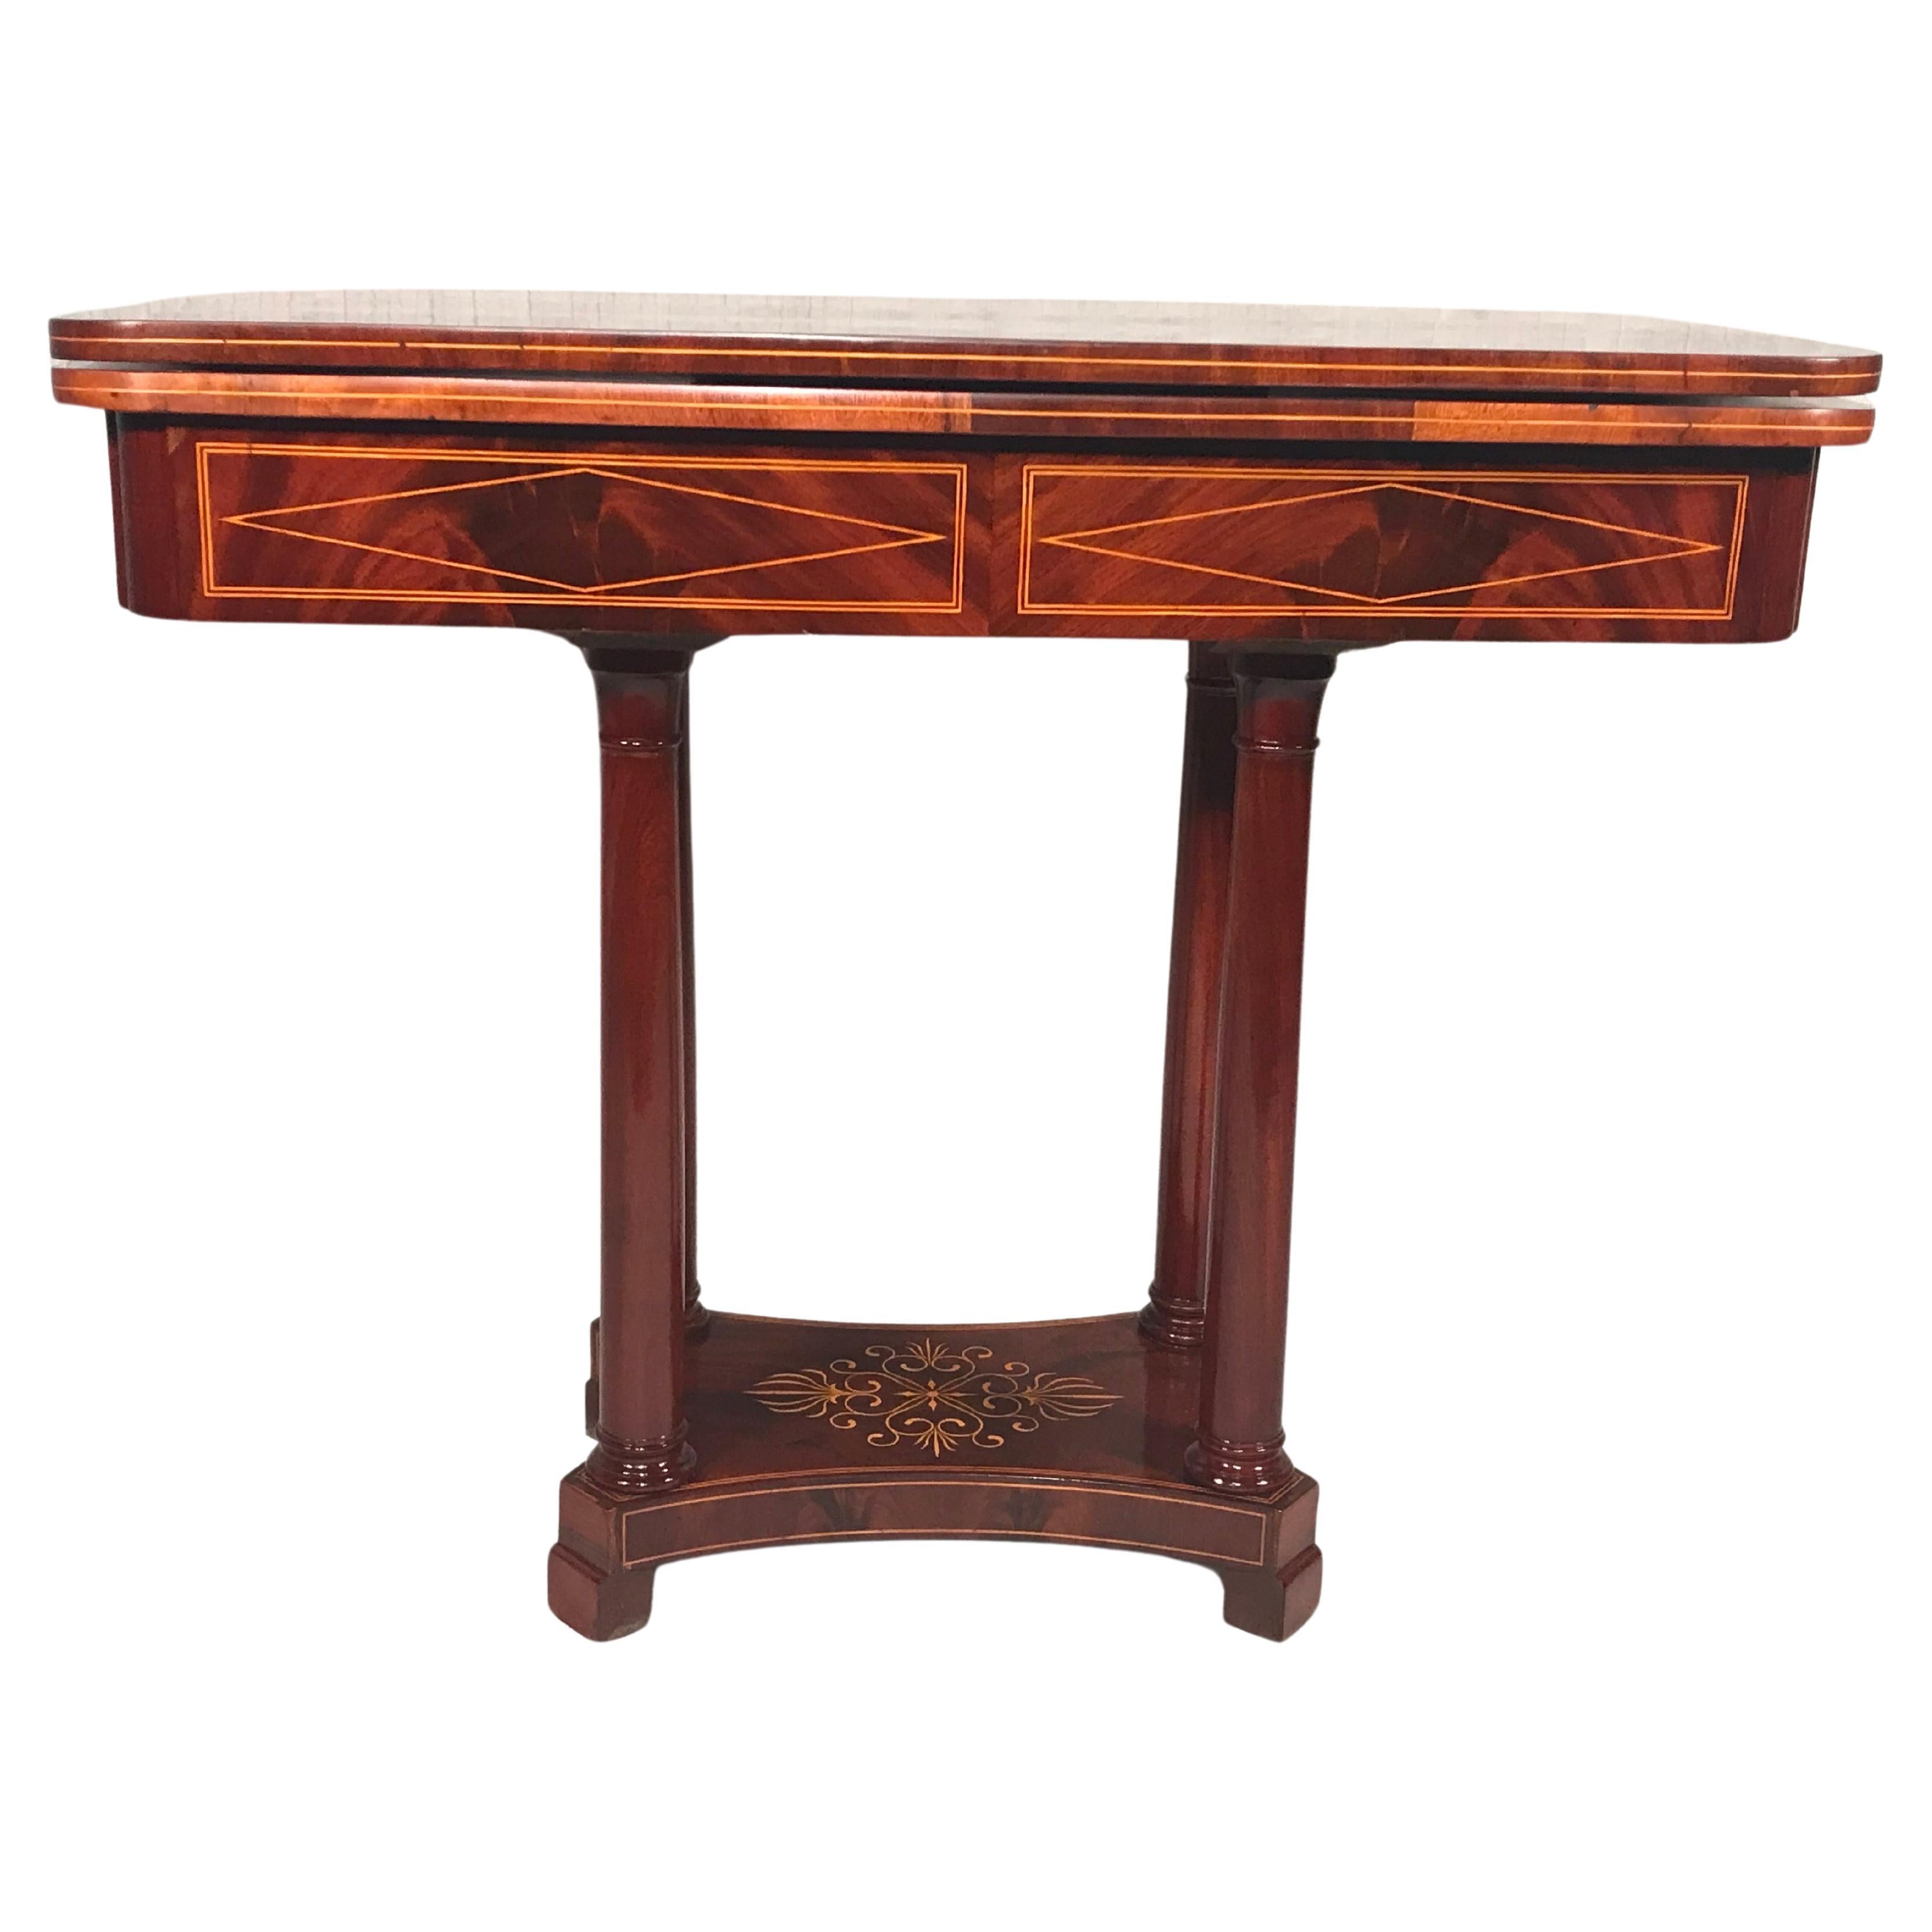 mmerse yourself in the charm of this delightful 19th-century game table, a French masterpiece hailing from the Restoration period around 1830. Adorned with a captivating mahogany veneer featuring intricate floral inlays on the base and inlaid band